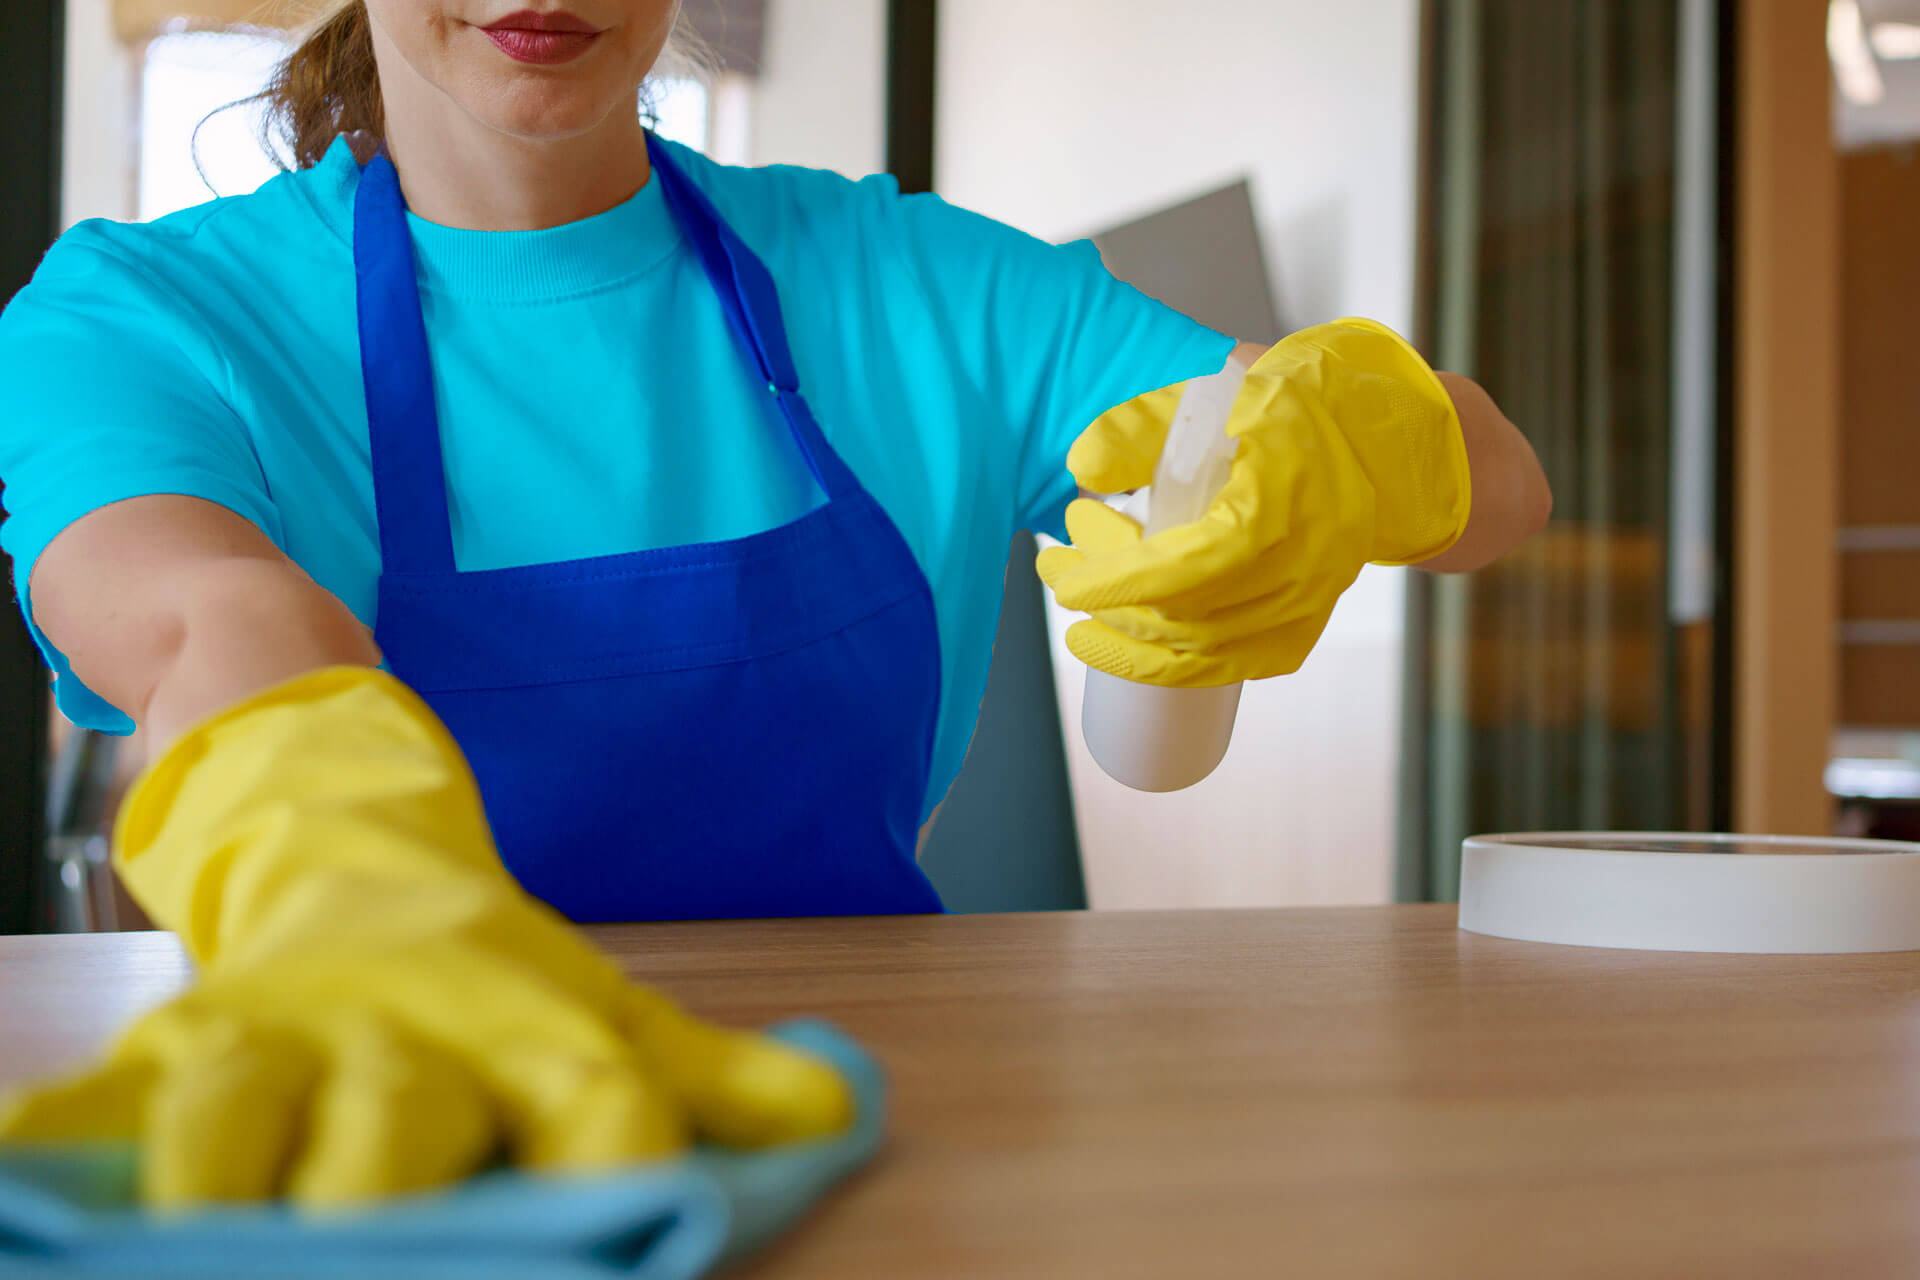 A maid from Laredo, Texas, wearing a blue apron and yellow gloves, cleaning a table for a cleaning service.